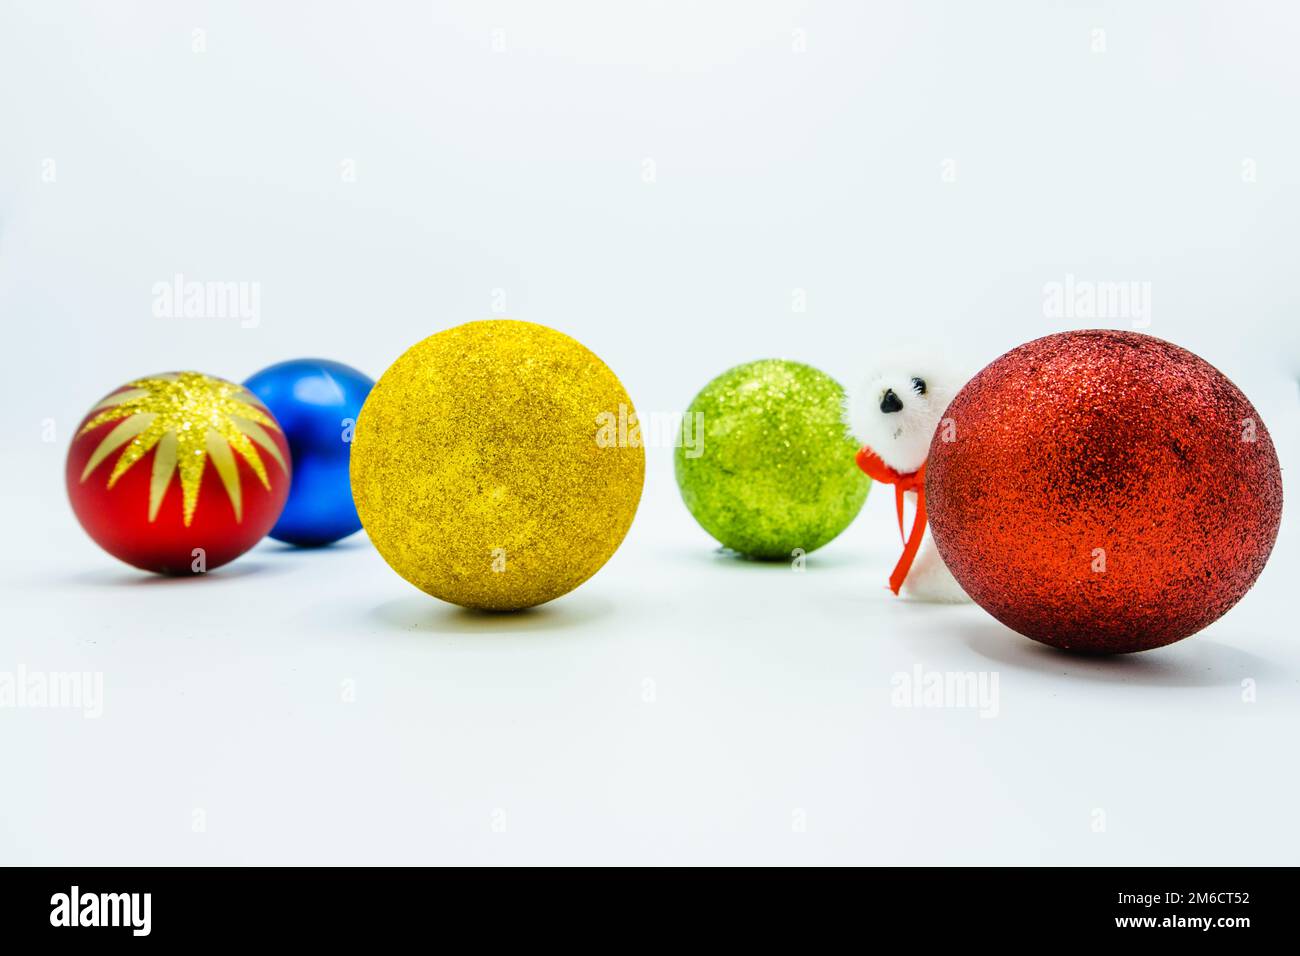 Red, green, gold, blue christmas balls and a white polar bear toy. Stock Photo